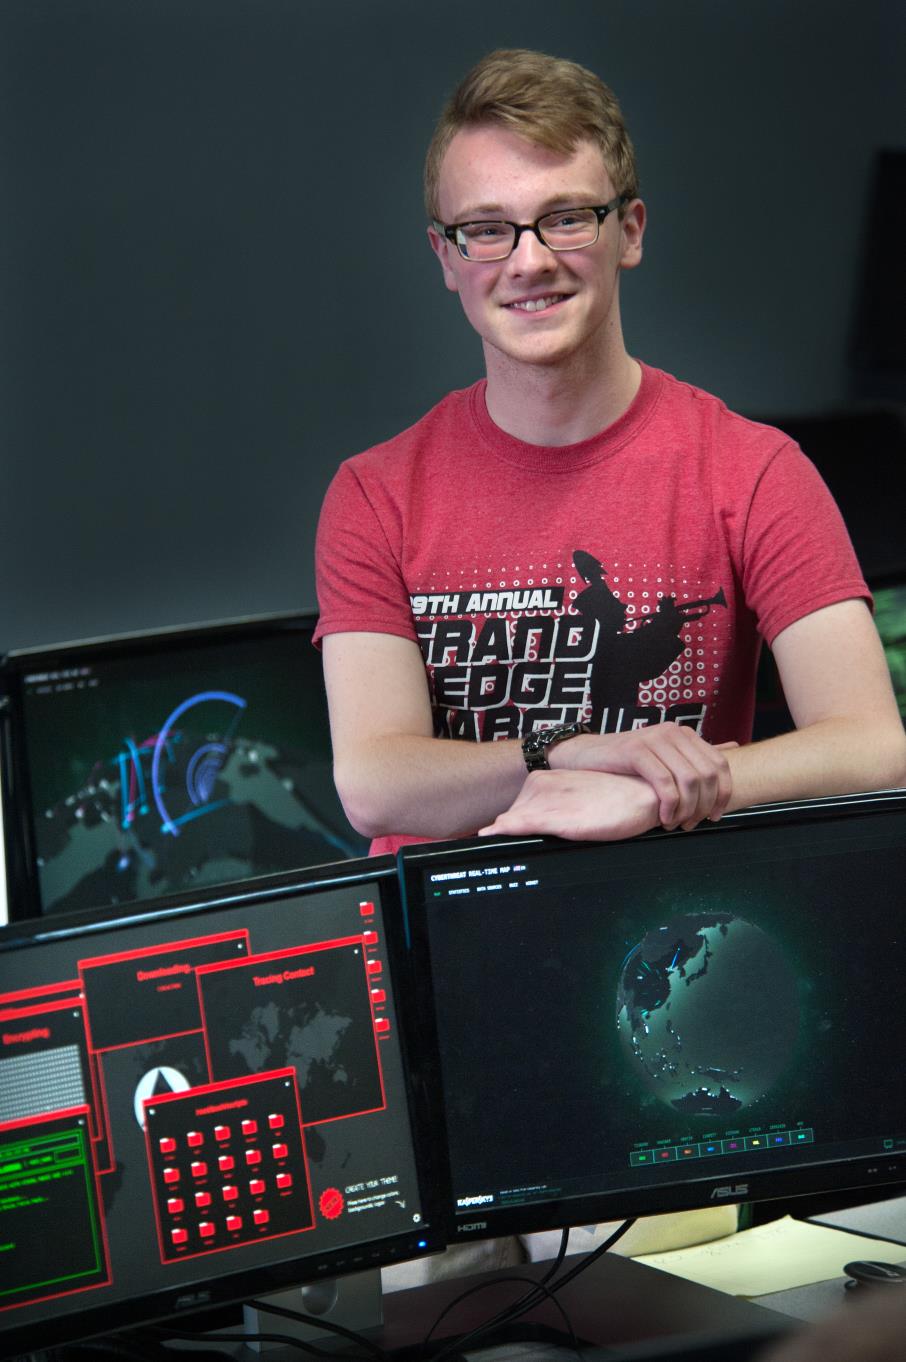 Male Cybersecurity student stands in front of his computer